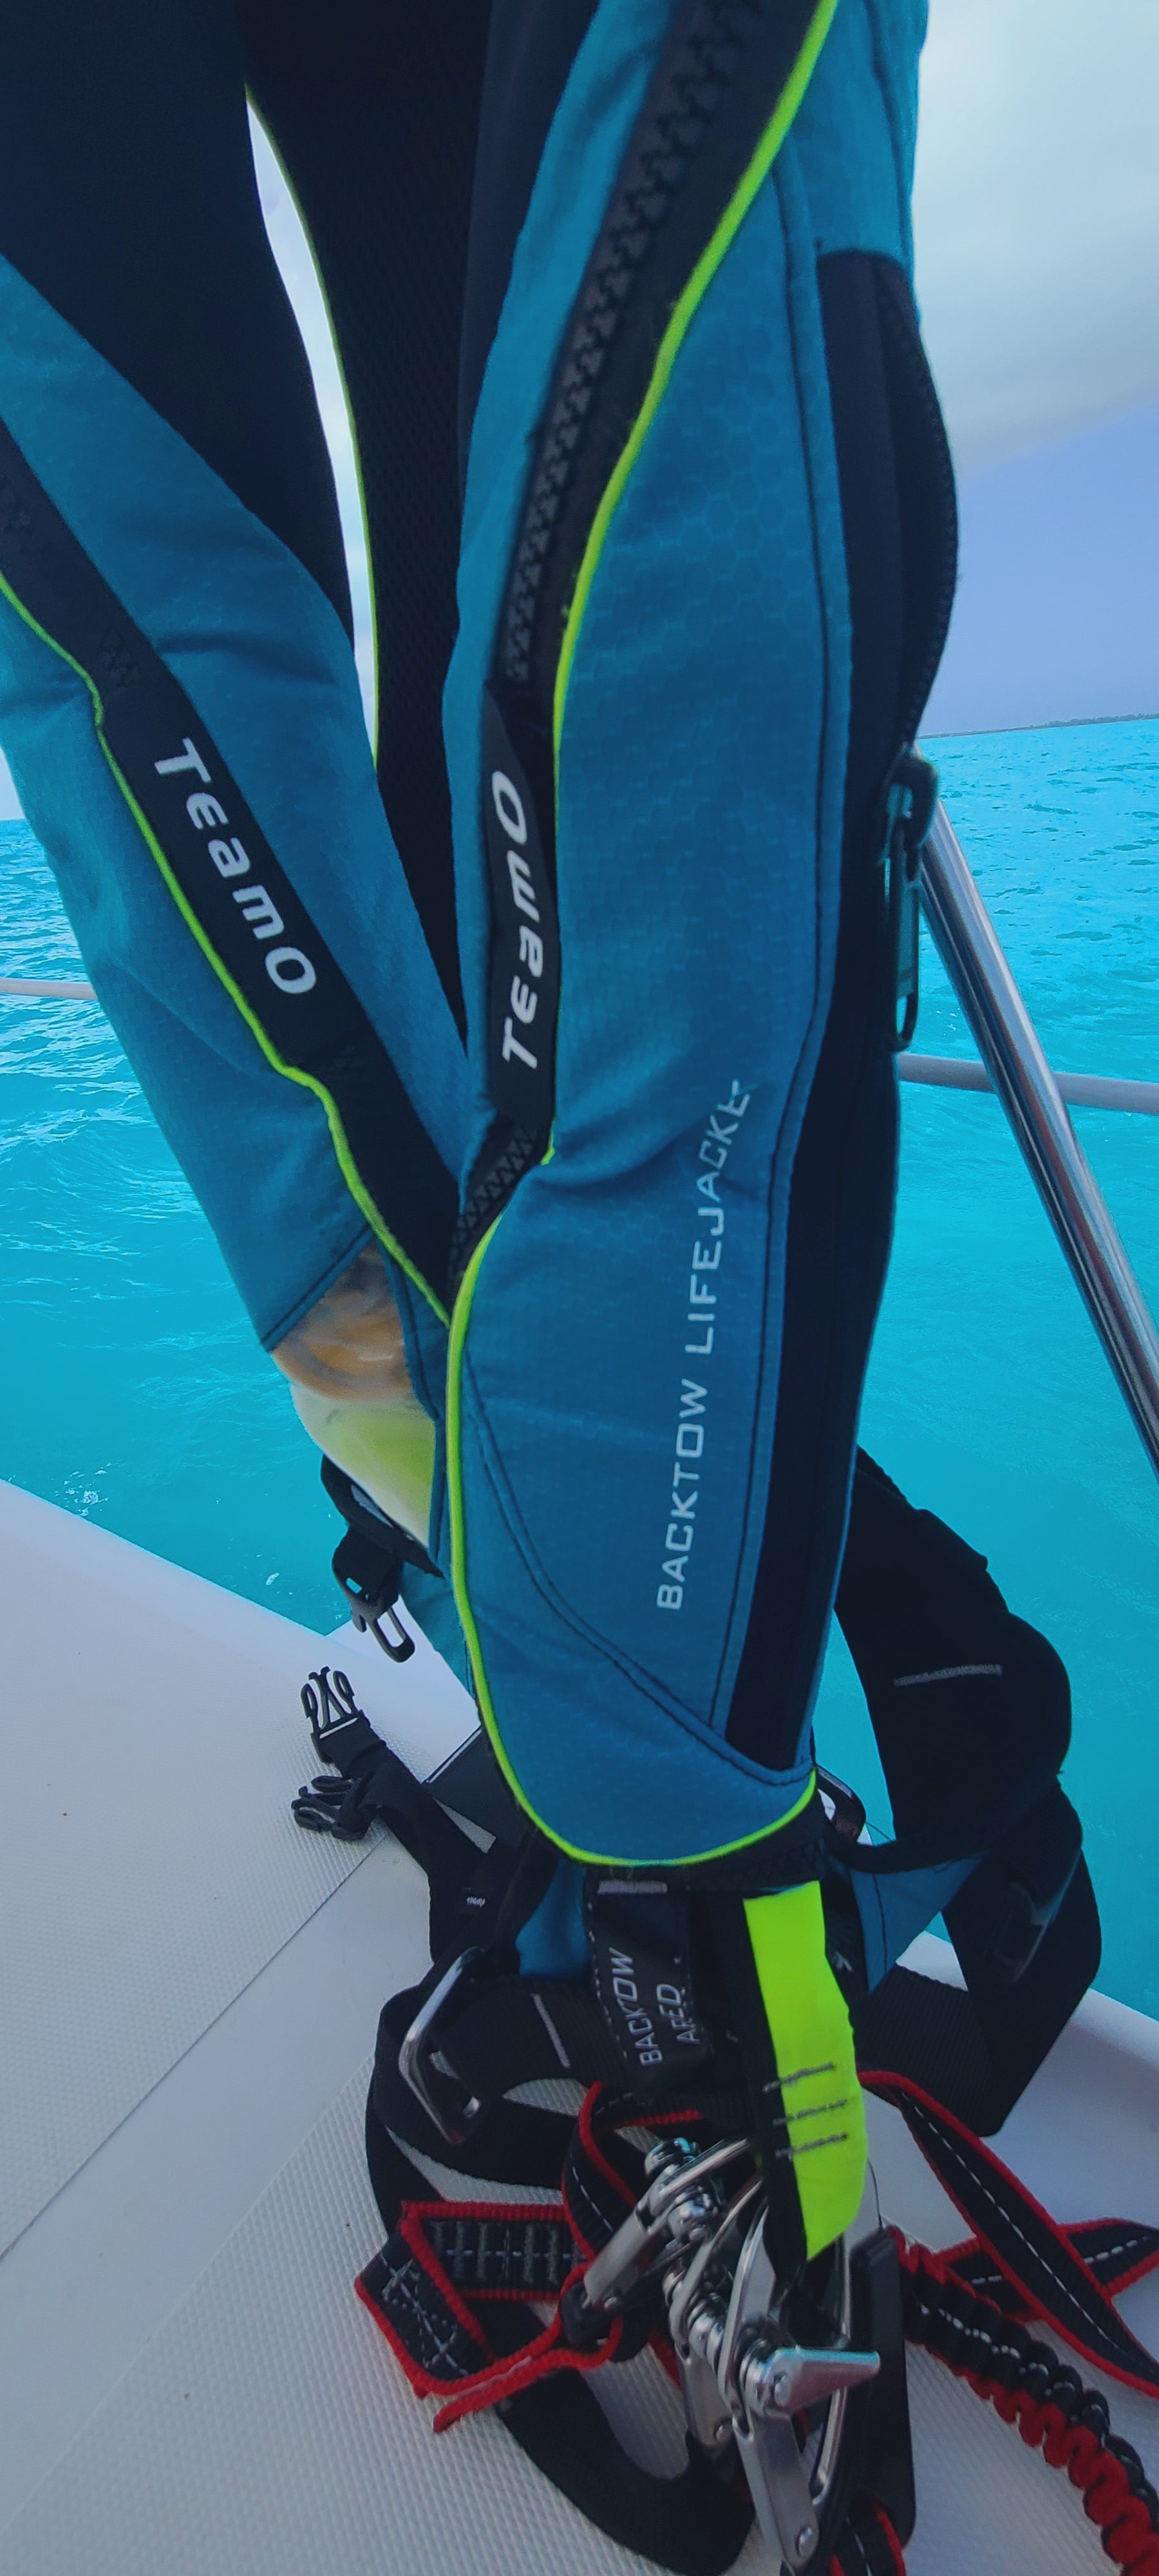 TeamO logo on the PFD inflatable lifejacket, with side zipper for erp